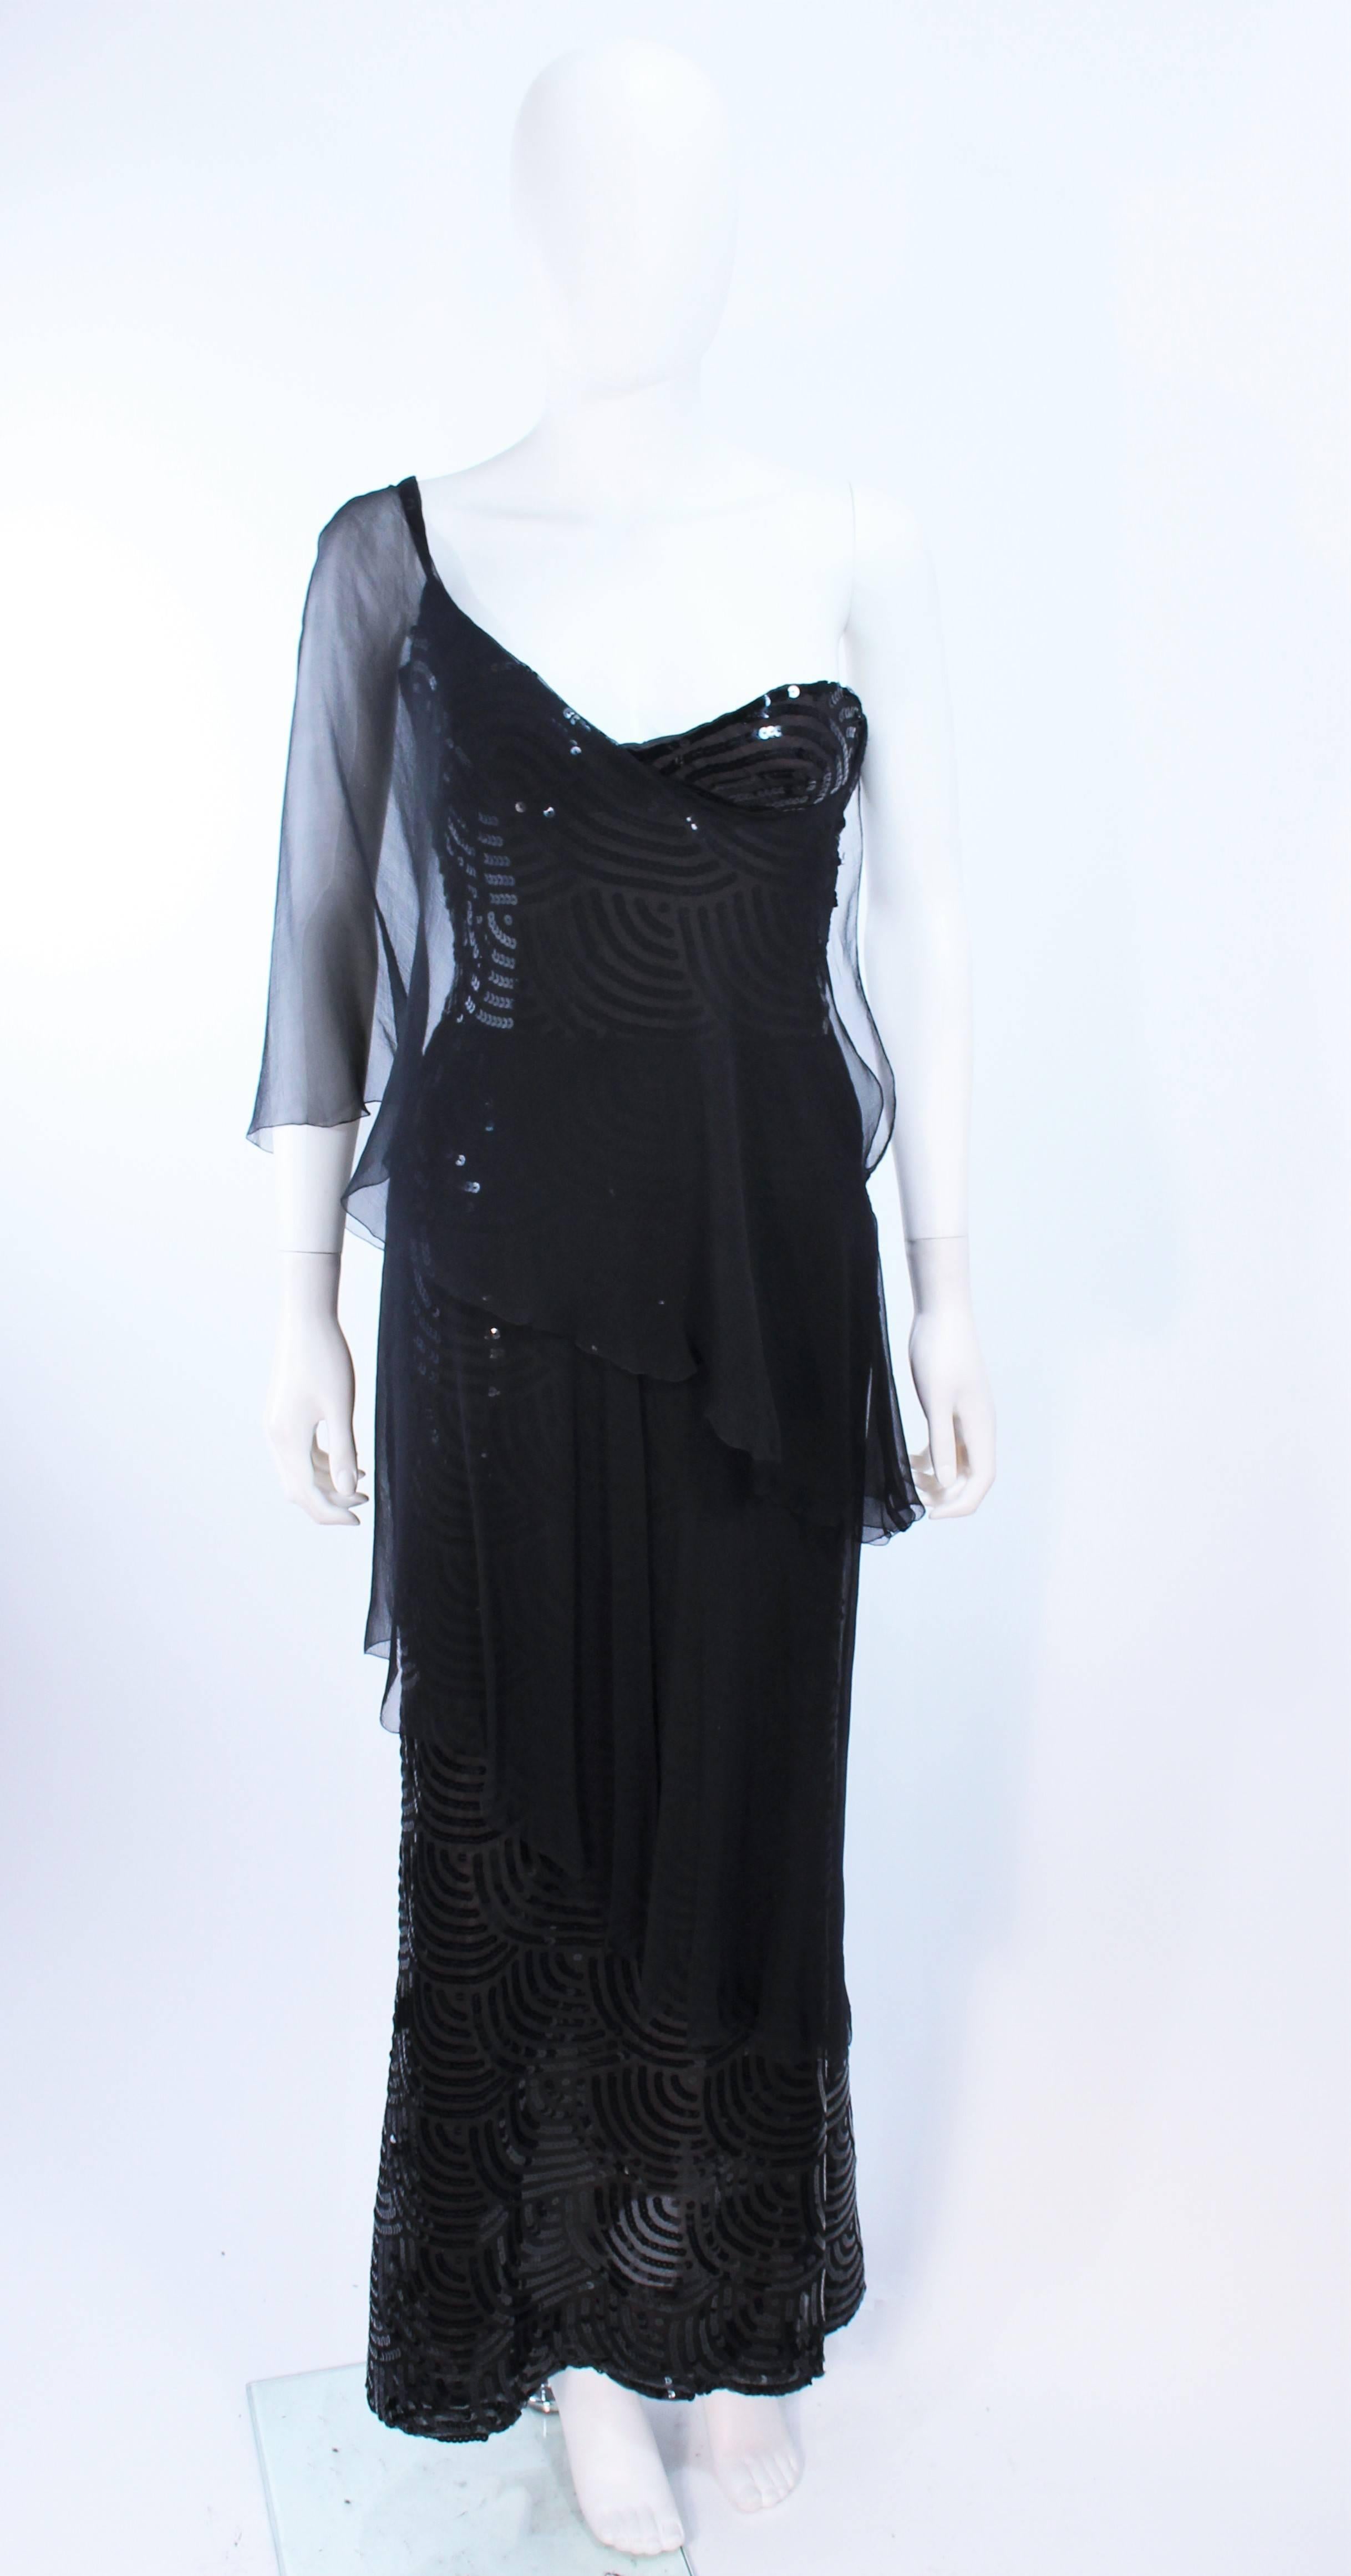 This Loris Azzaro attributed gown is composed of black silk chiffon with sequin applique throughout. Features a draped one shoulder style. There is a side zipper closure, with hook & eyes, with interior bustier as well. In excellent vintage